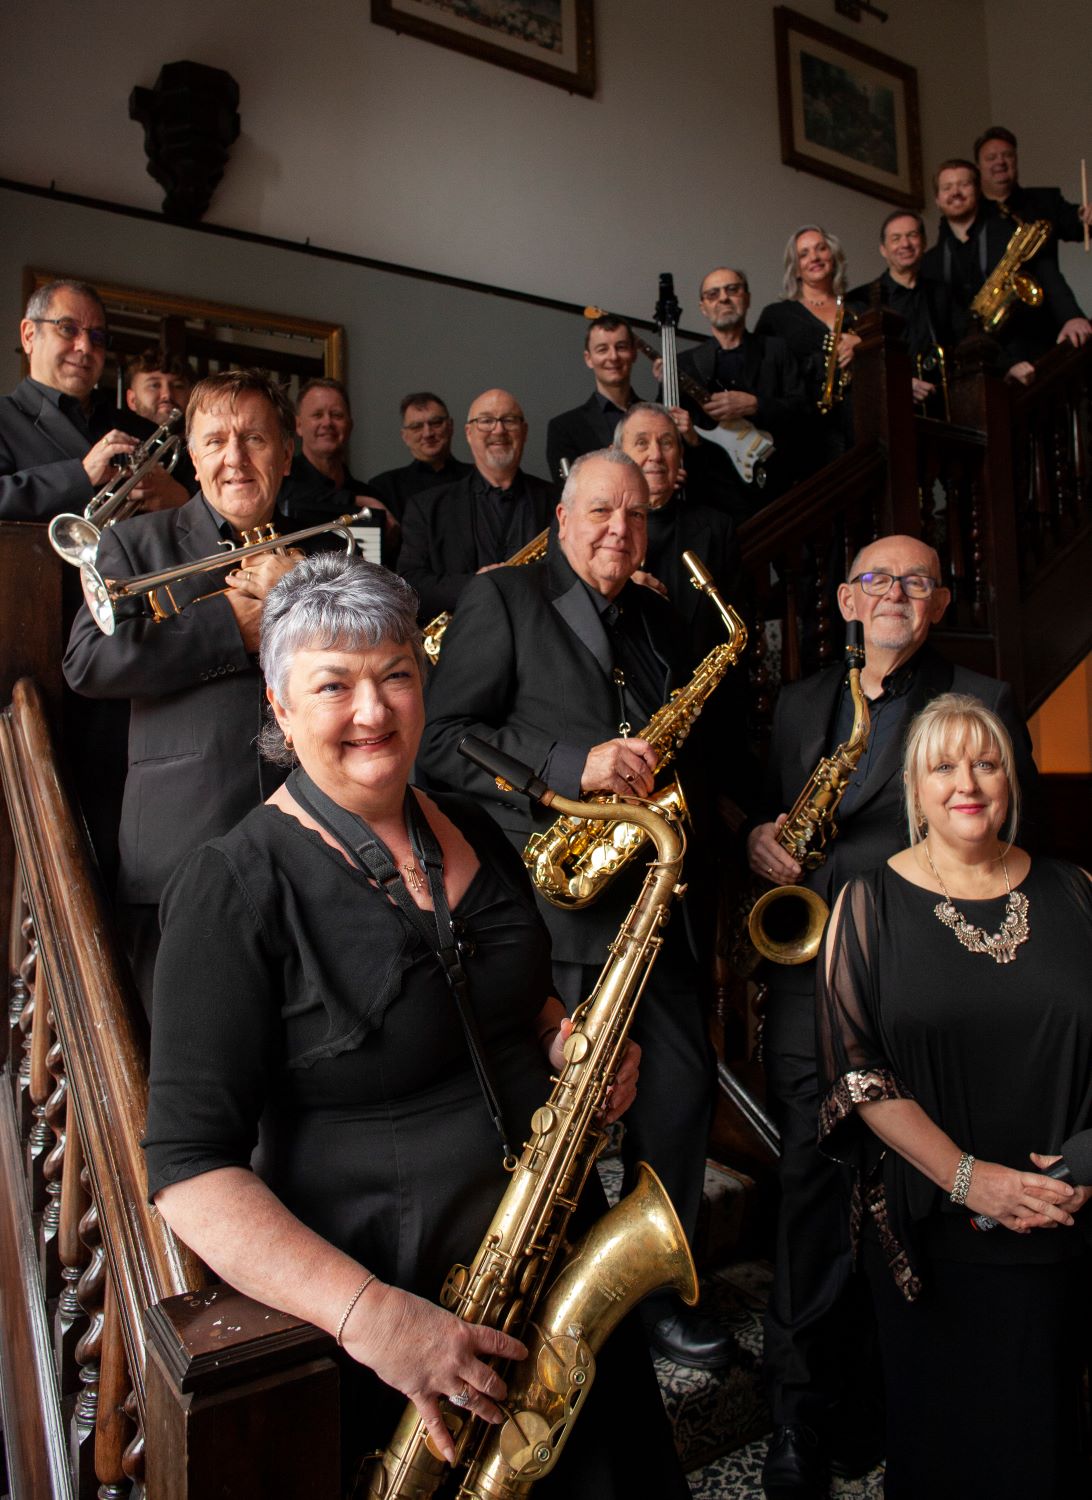 Playing music from Count Basie, Stan Kenton, and Tommy Dorsey, the Front Row Big Band are sure to entertain you in Norwich, Norfolk.